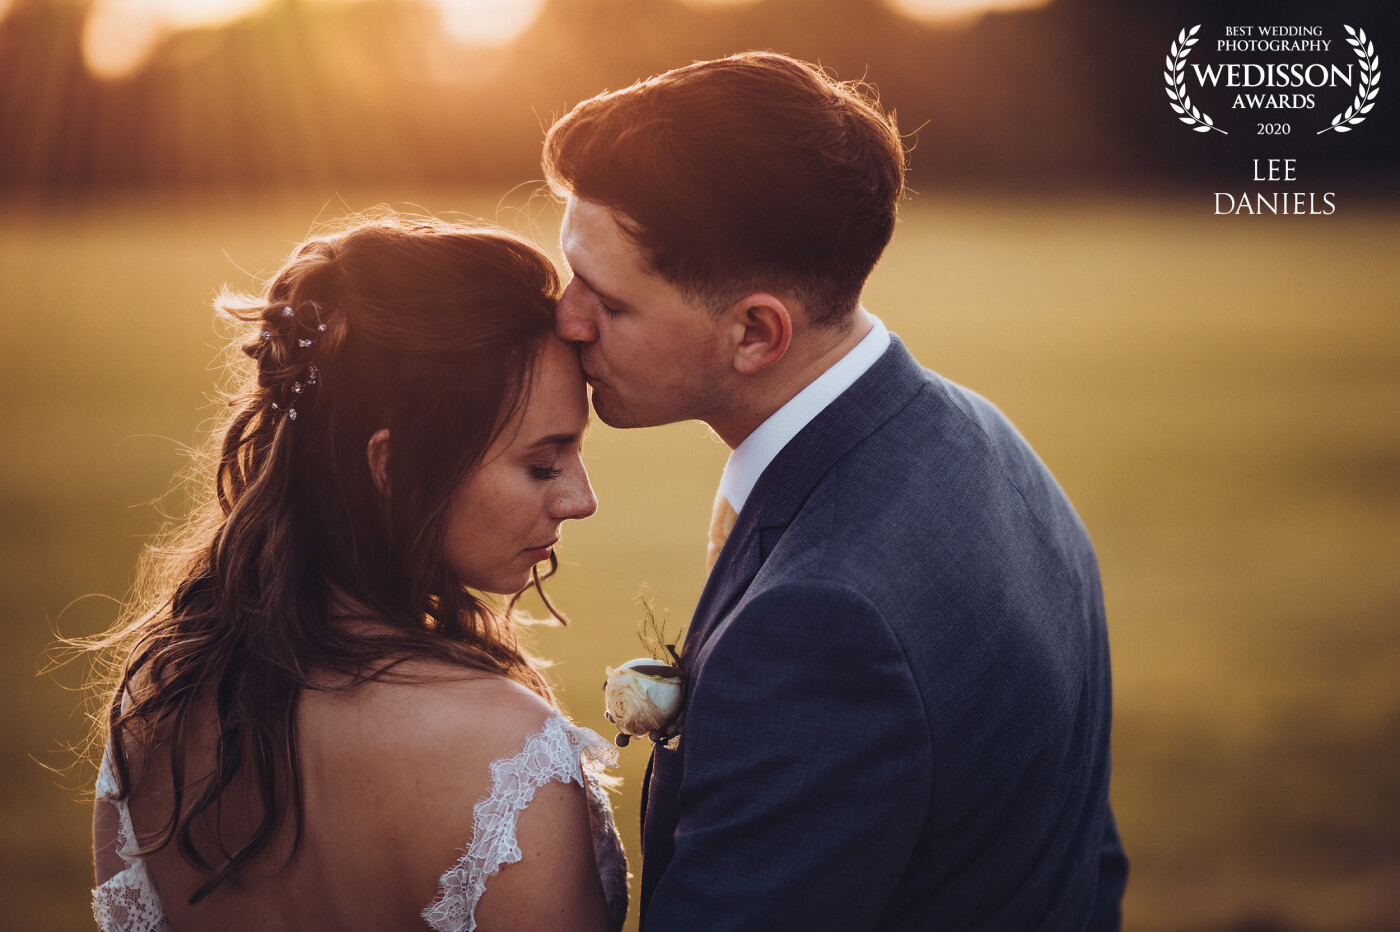 The summer sun was finally dipping below the horizon, Sarah & Blake had one last intimate moment before they headed back to greet their evening guest<br />
Venue - Burghley House Stamford 